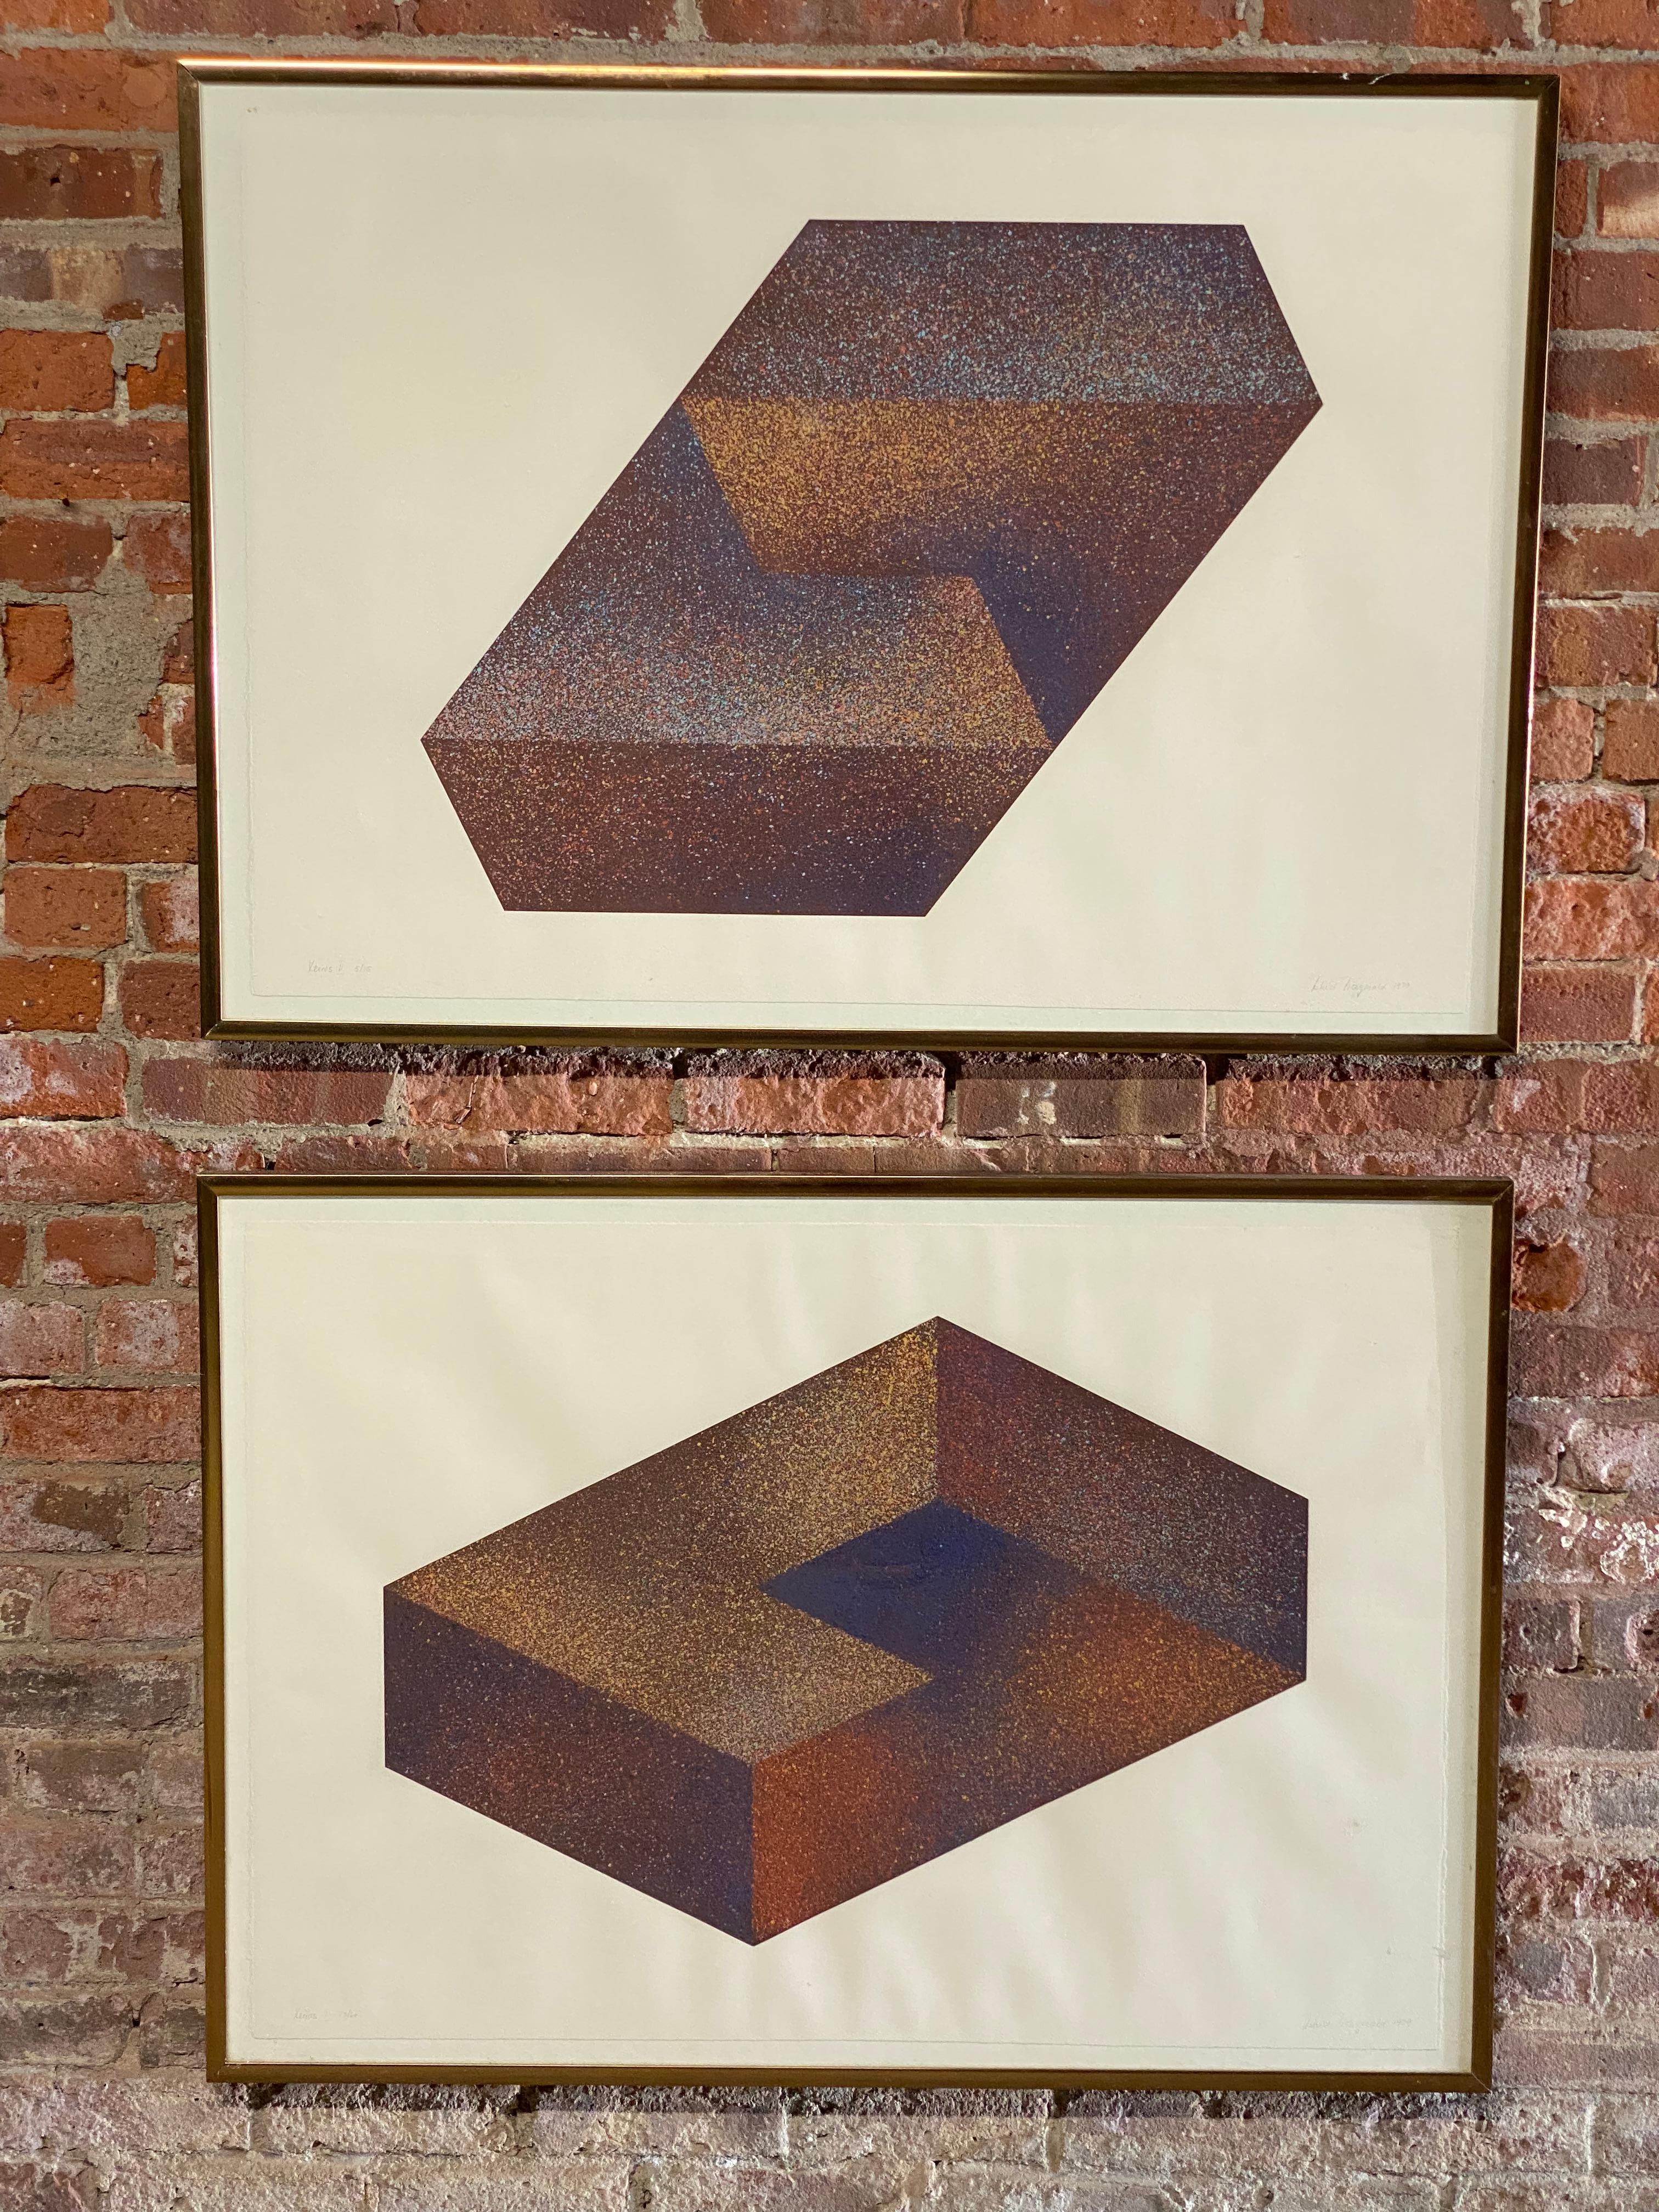 Astrid Fitzgerald, (Born: 1938 - Wil-St. Gallen, Switzerland), is known for geometric abstraction and printmaking. The pair of serigraphs are signed, titled and numbered in pencil in the lower margin, Astrid Fitzgerald, Xenos I and V, 1979. 'Xenos